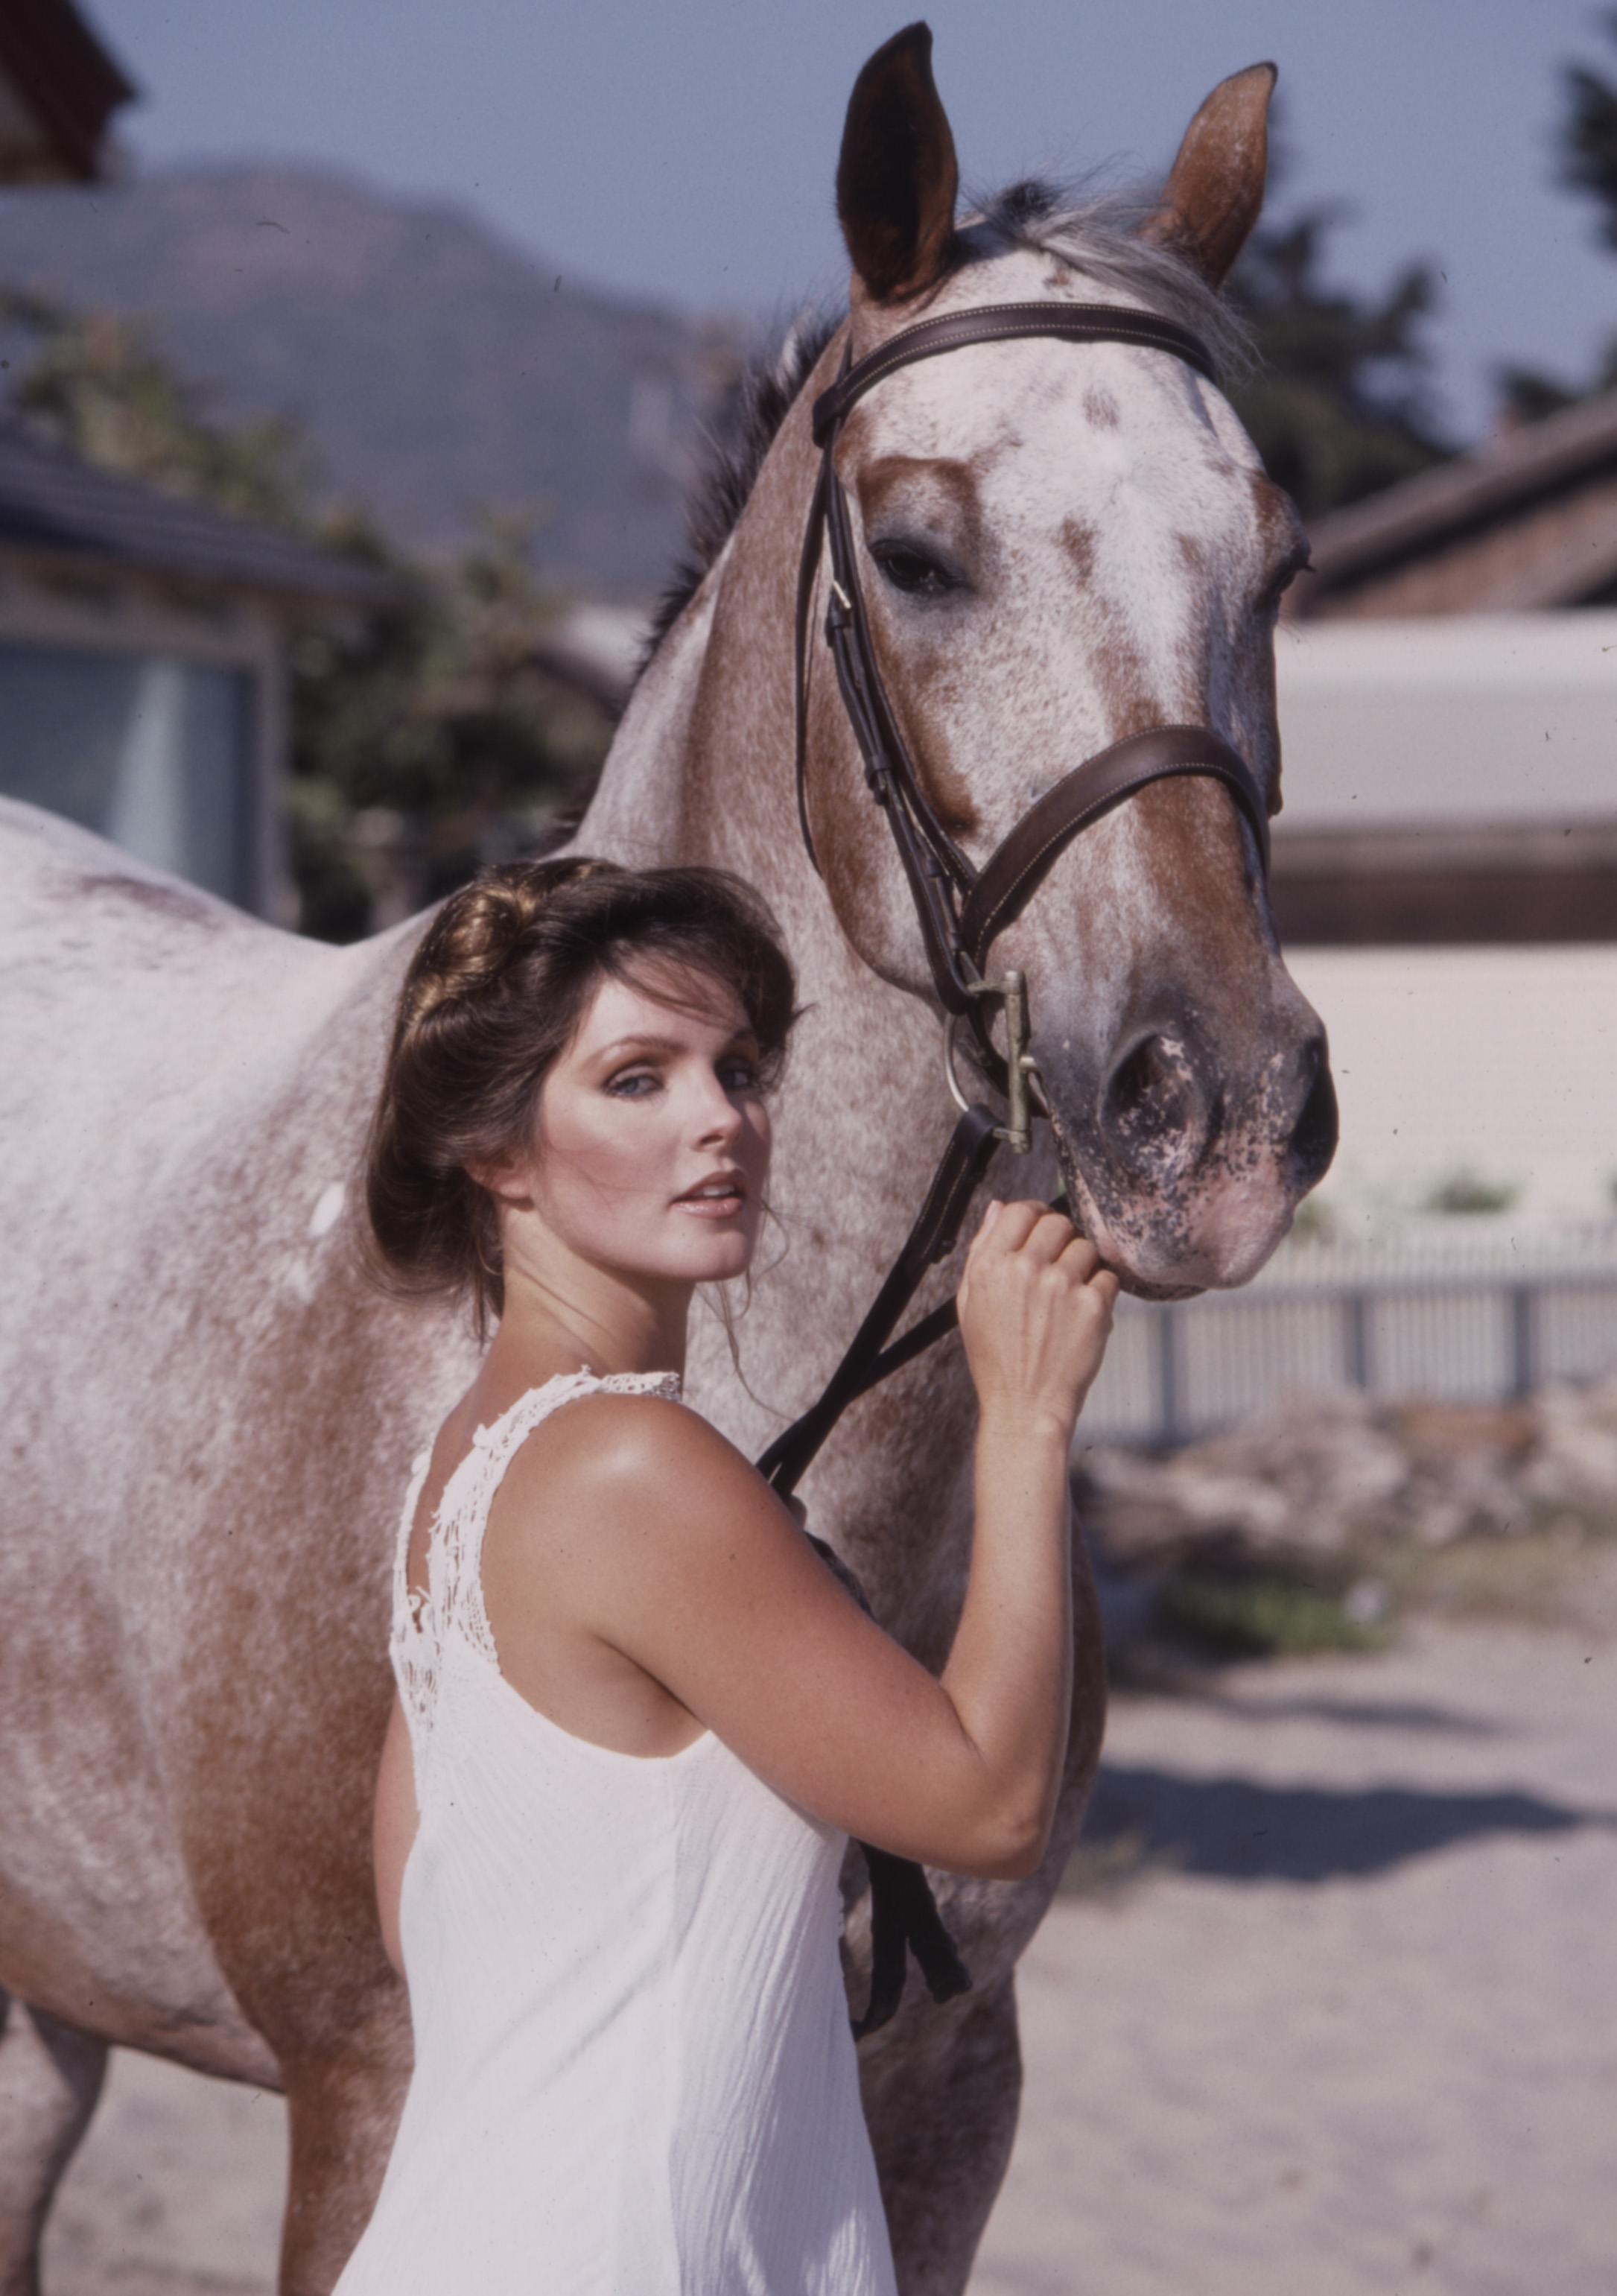 Priscilla Presley's promotional photo for "Those Amazing Animals" in Los Angeles, California, circa 1980. | Source: Getty Images